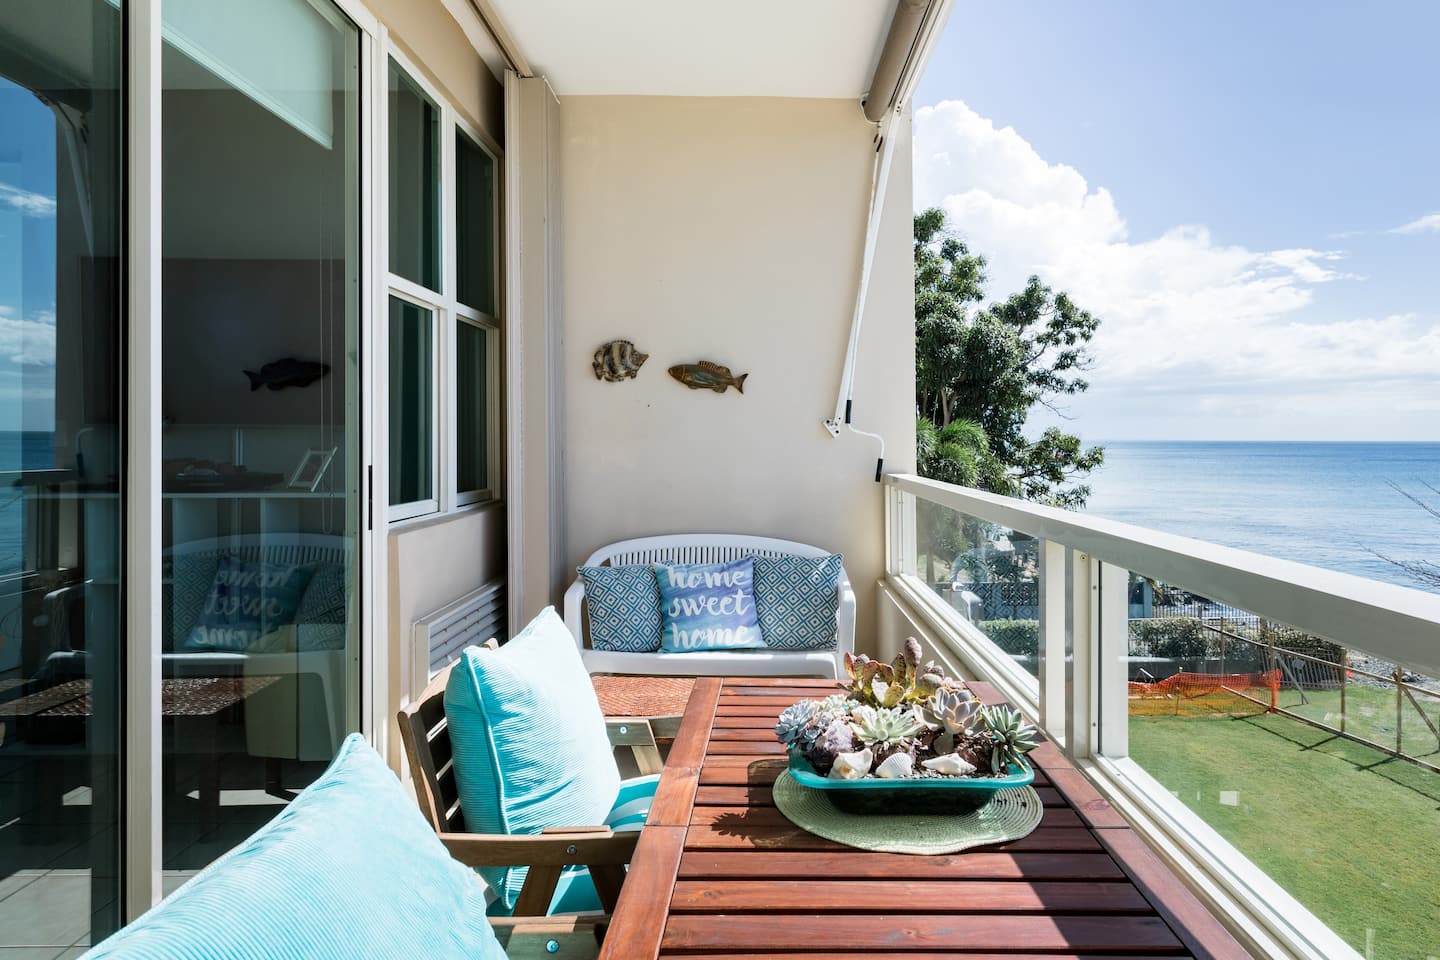 Rincon Beachfront Retreat, one of the best Airbnbs in Puerto Rico